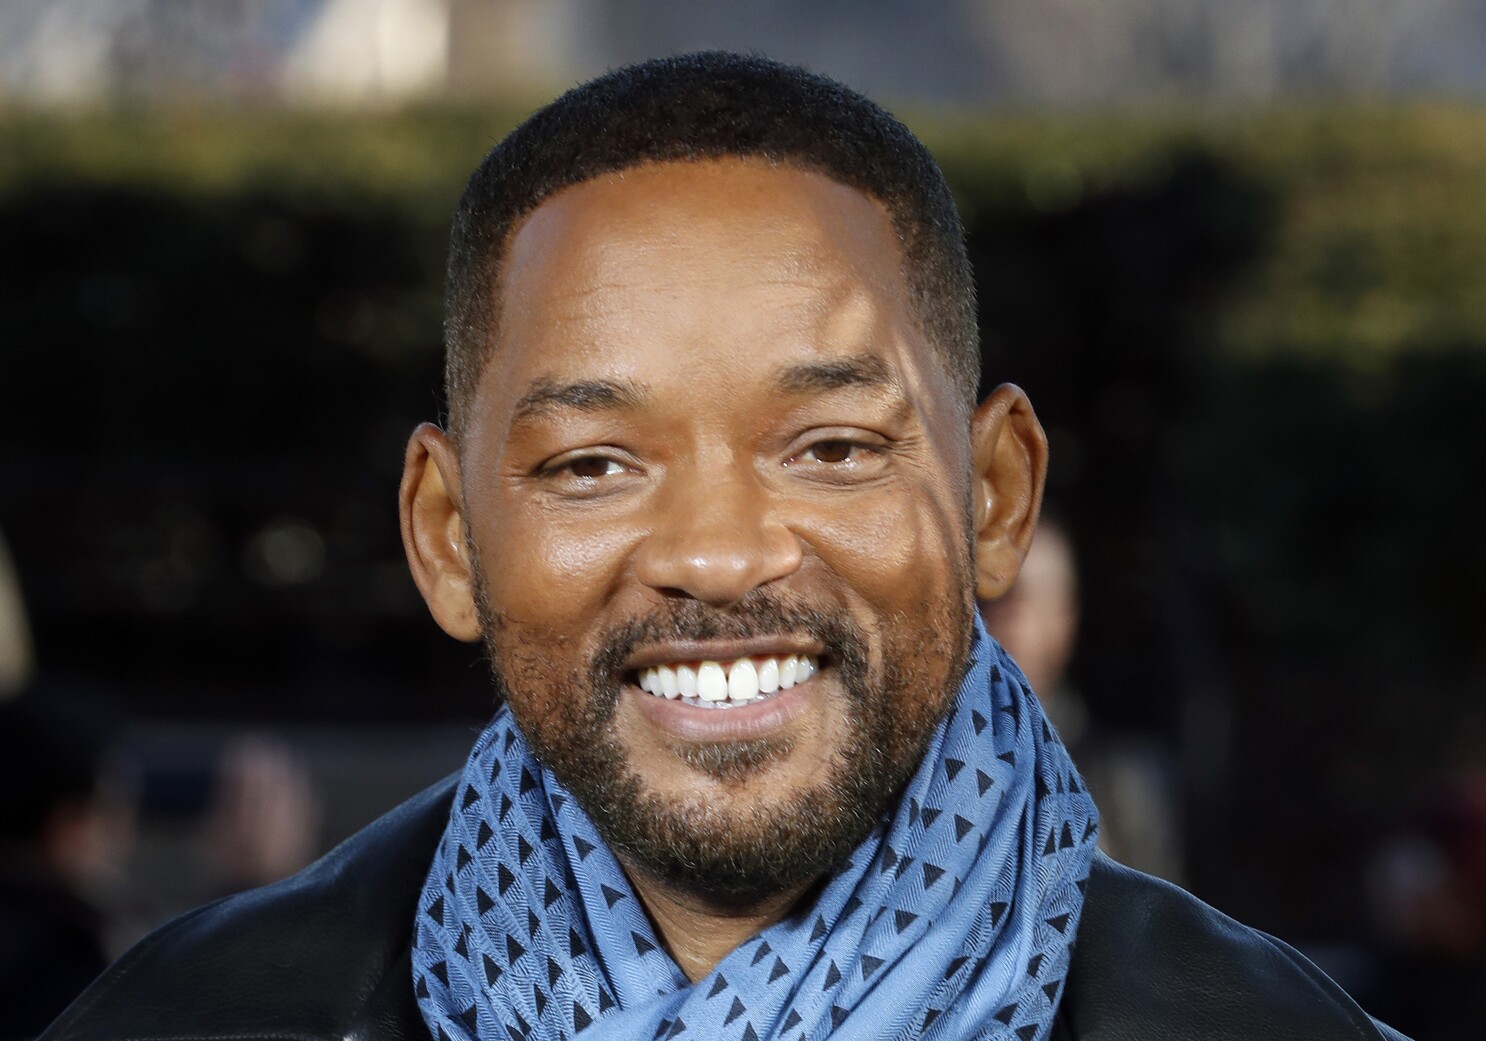 Will Smith will star in Emancipation. The first release post the slap saga.